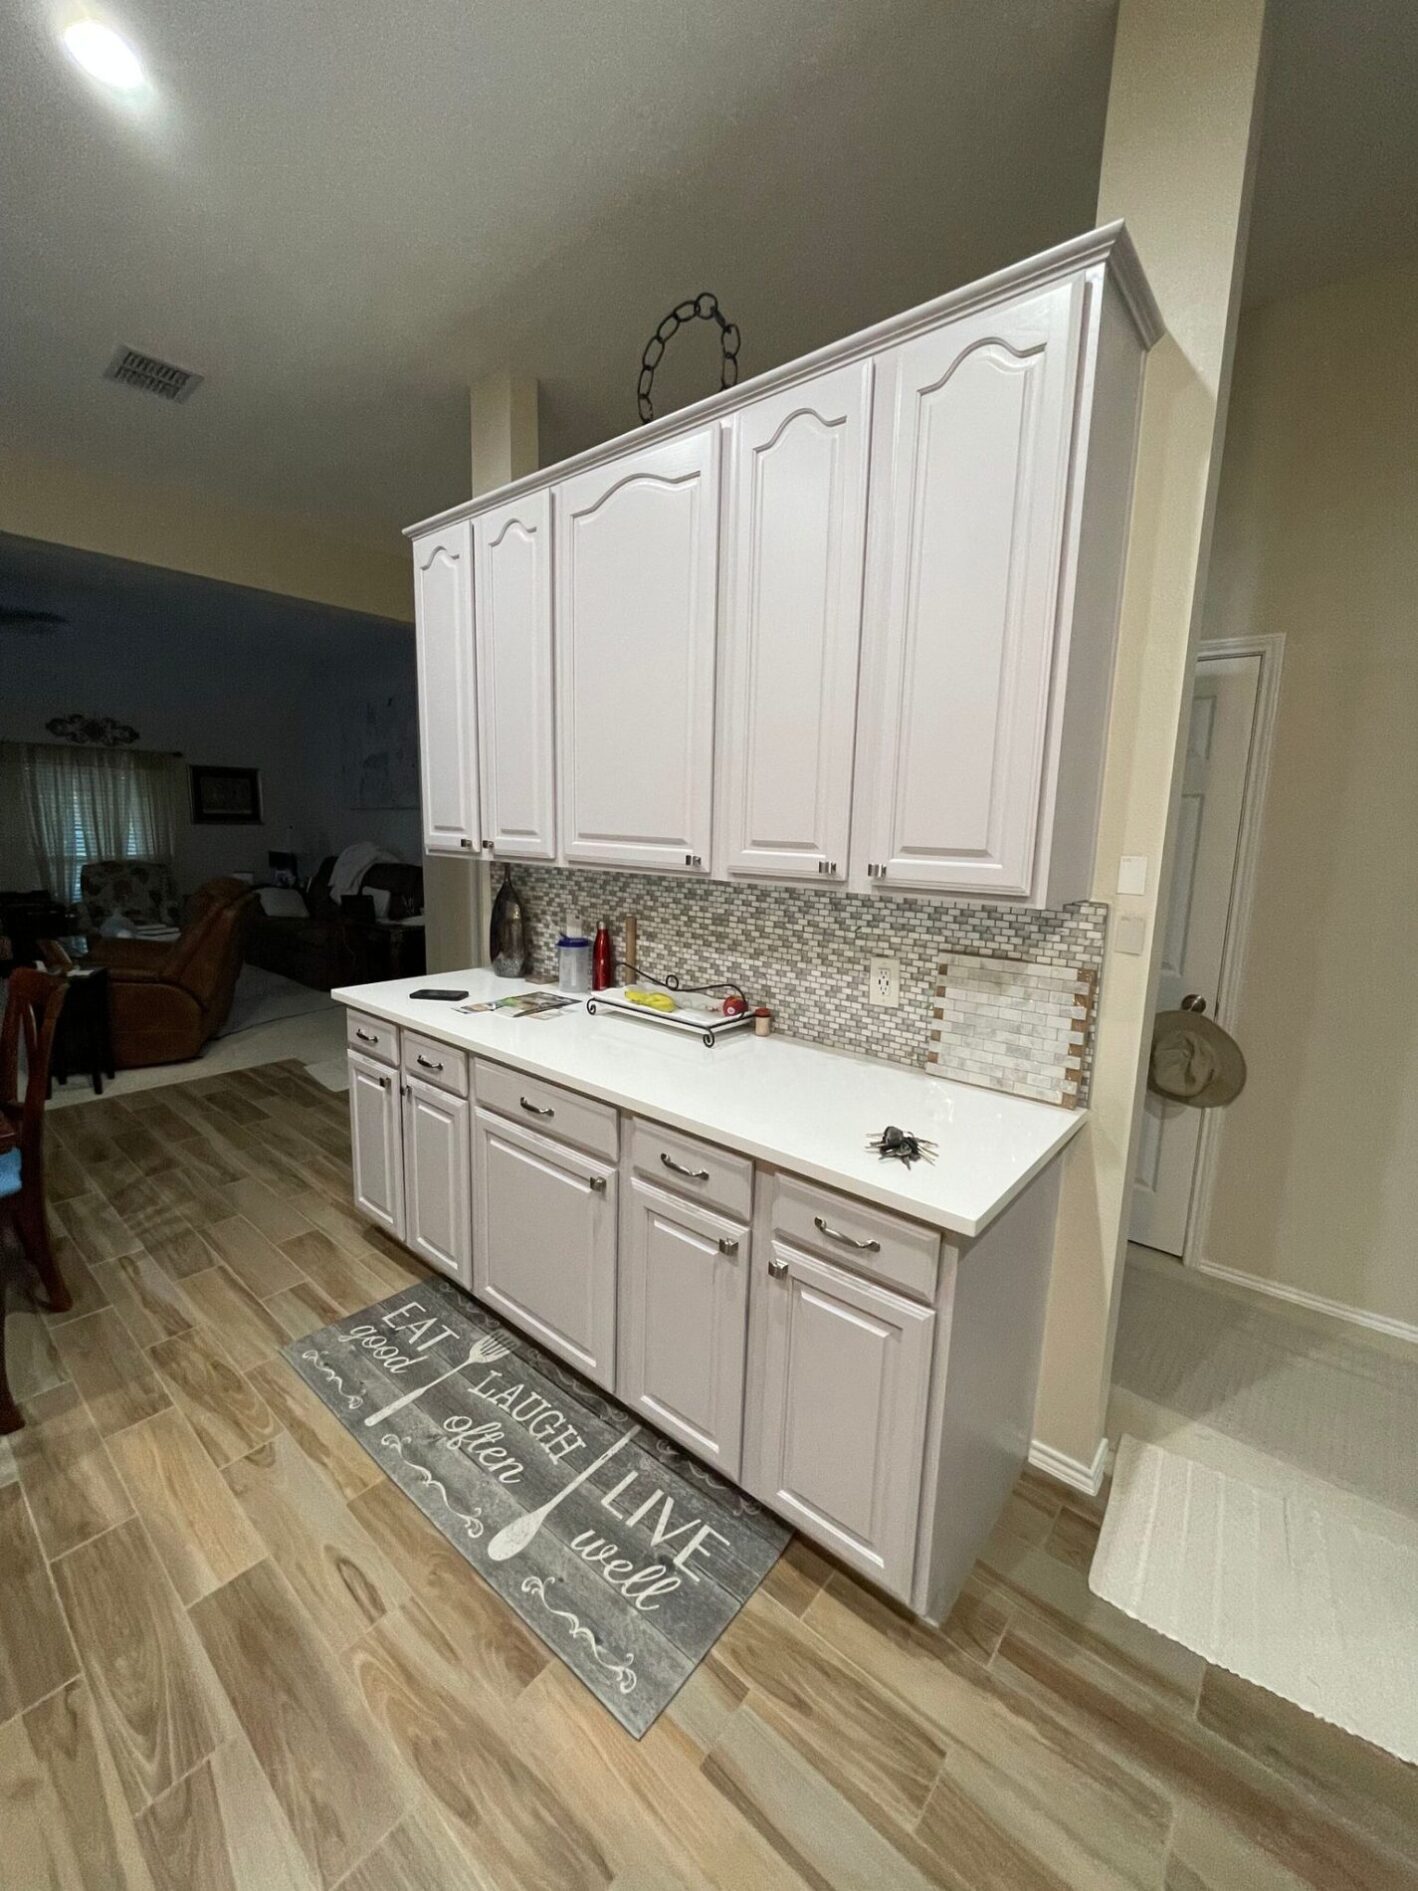 No.1 Best Home Cabinet Refinishing Texas - AMD Remodeling